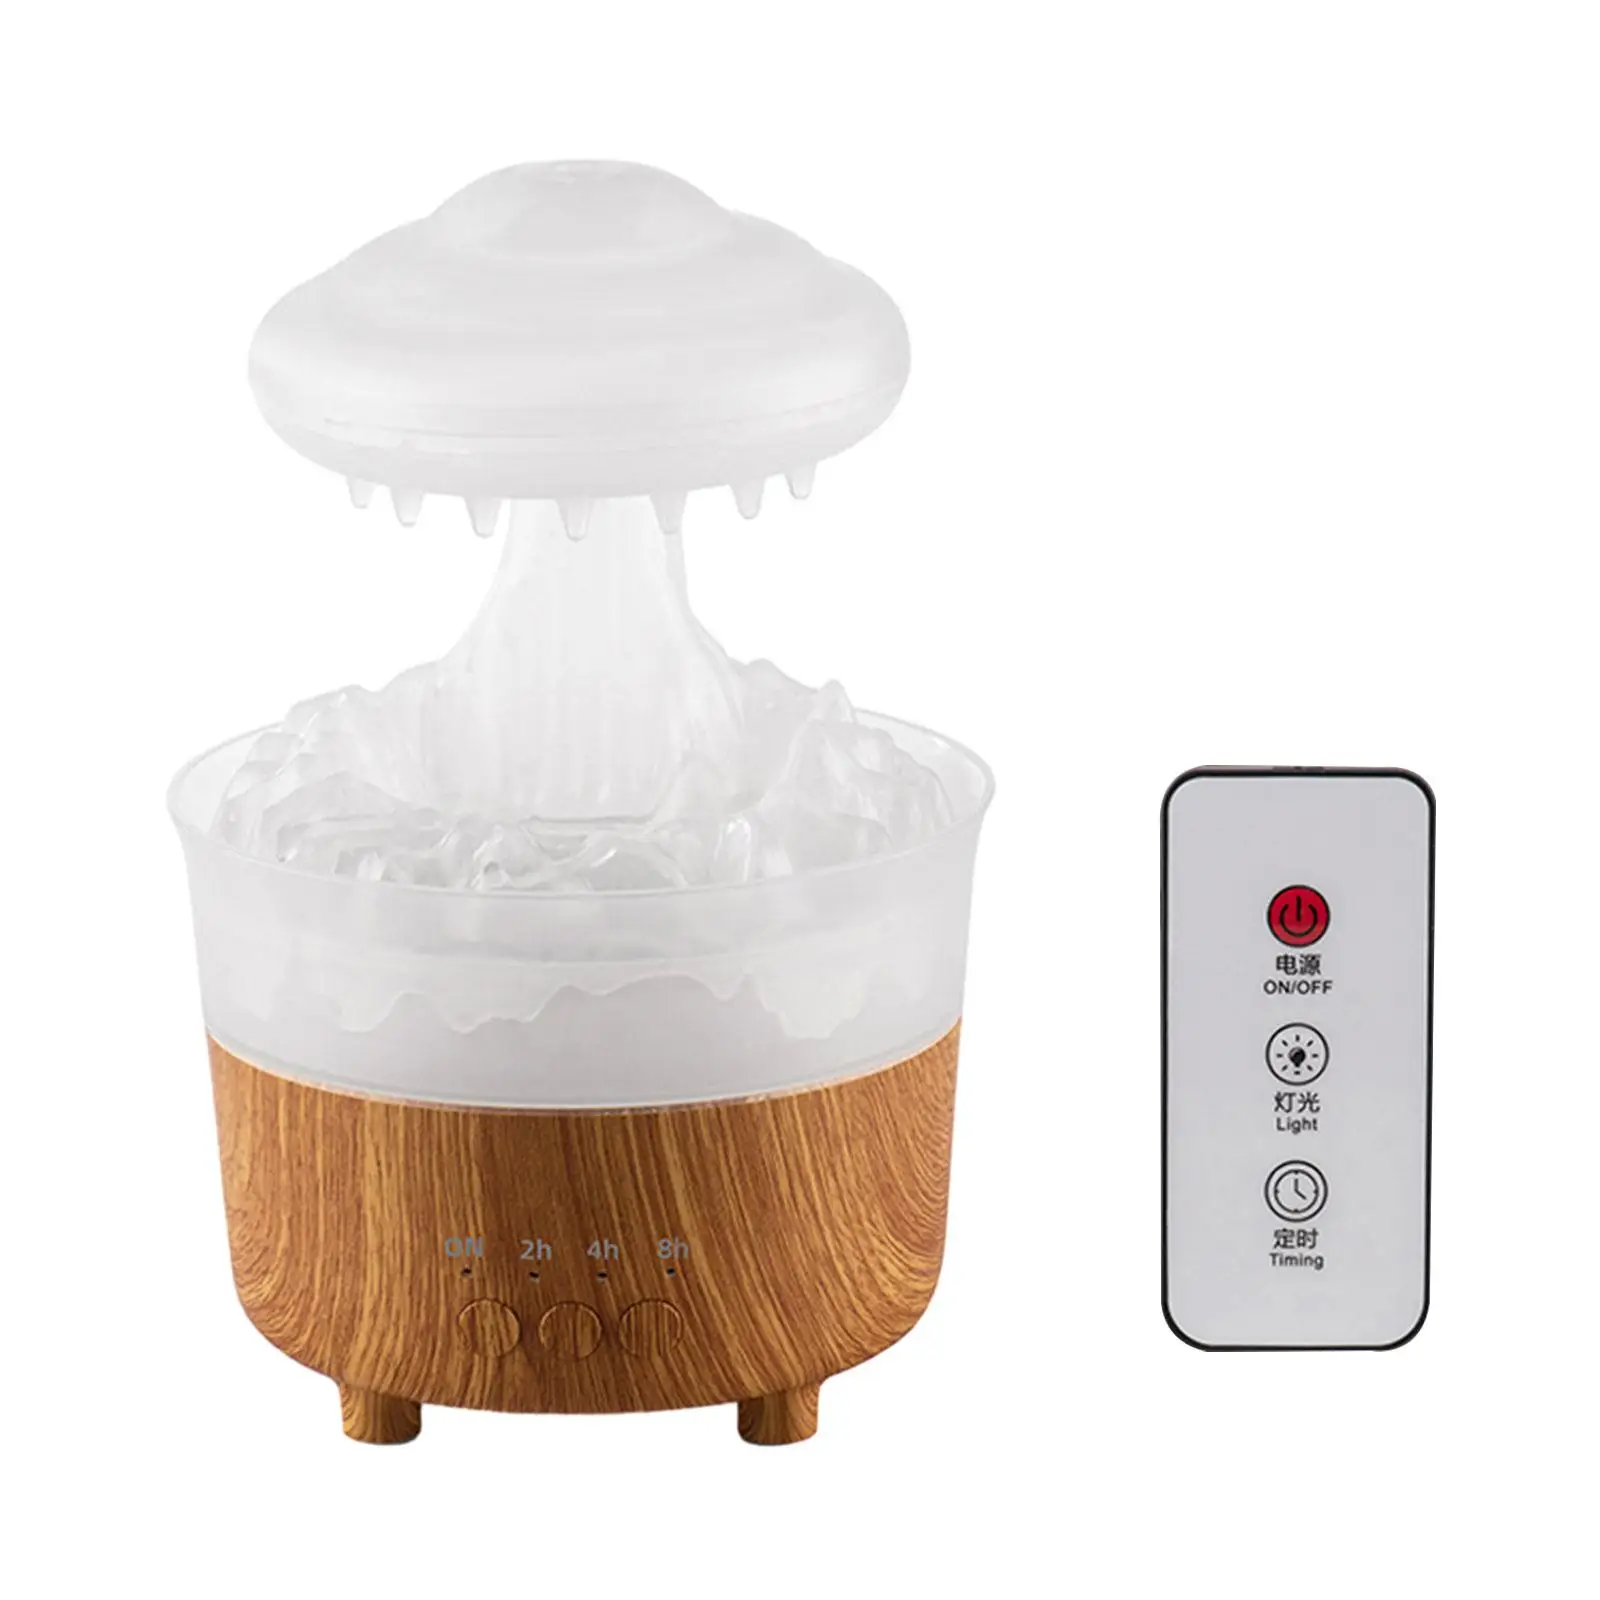 Essential Oil Diffuser Mute Personal Desktop Humidifier for Desk Room Office